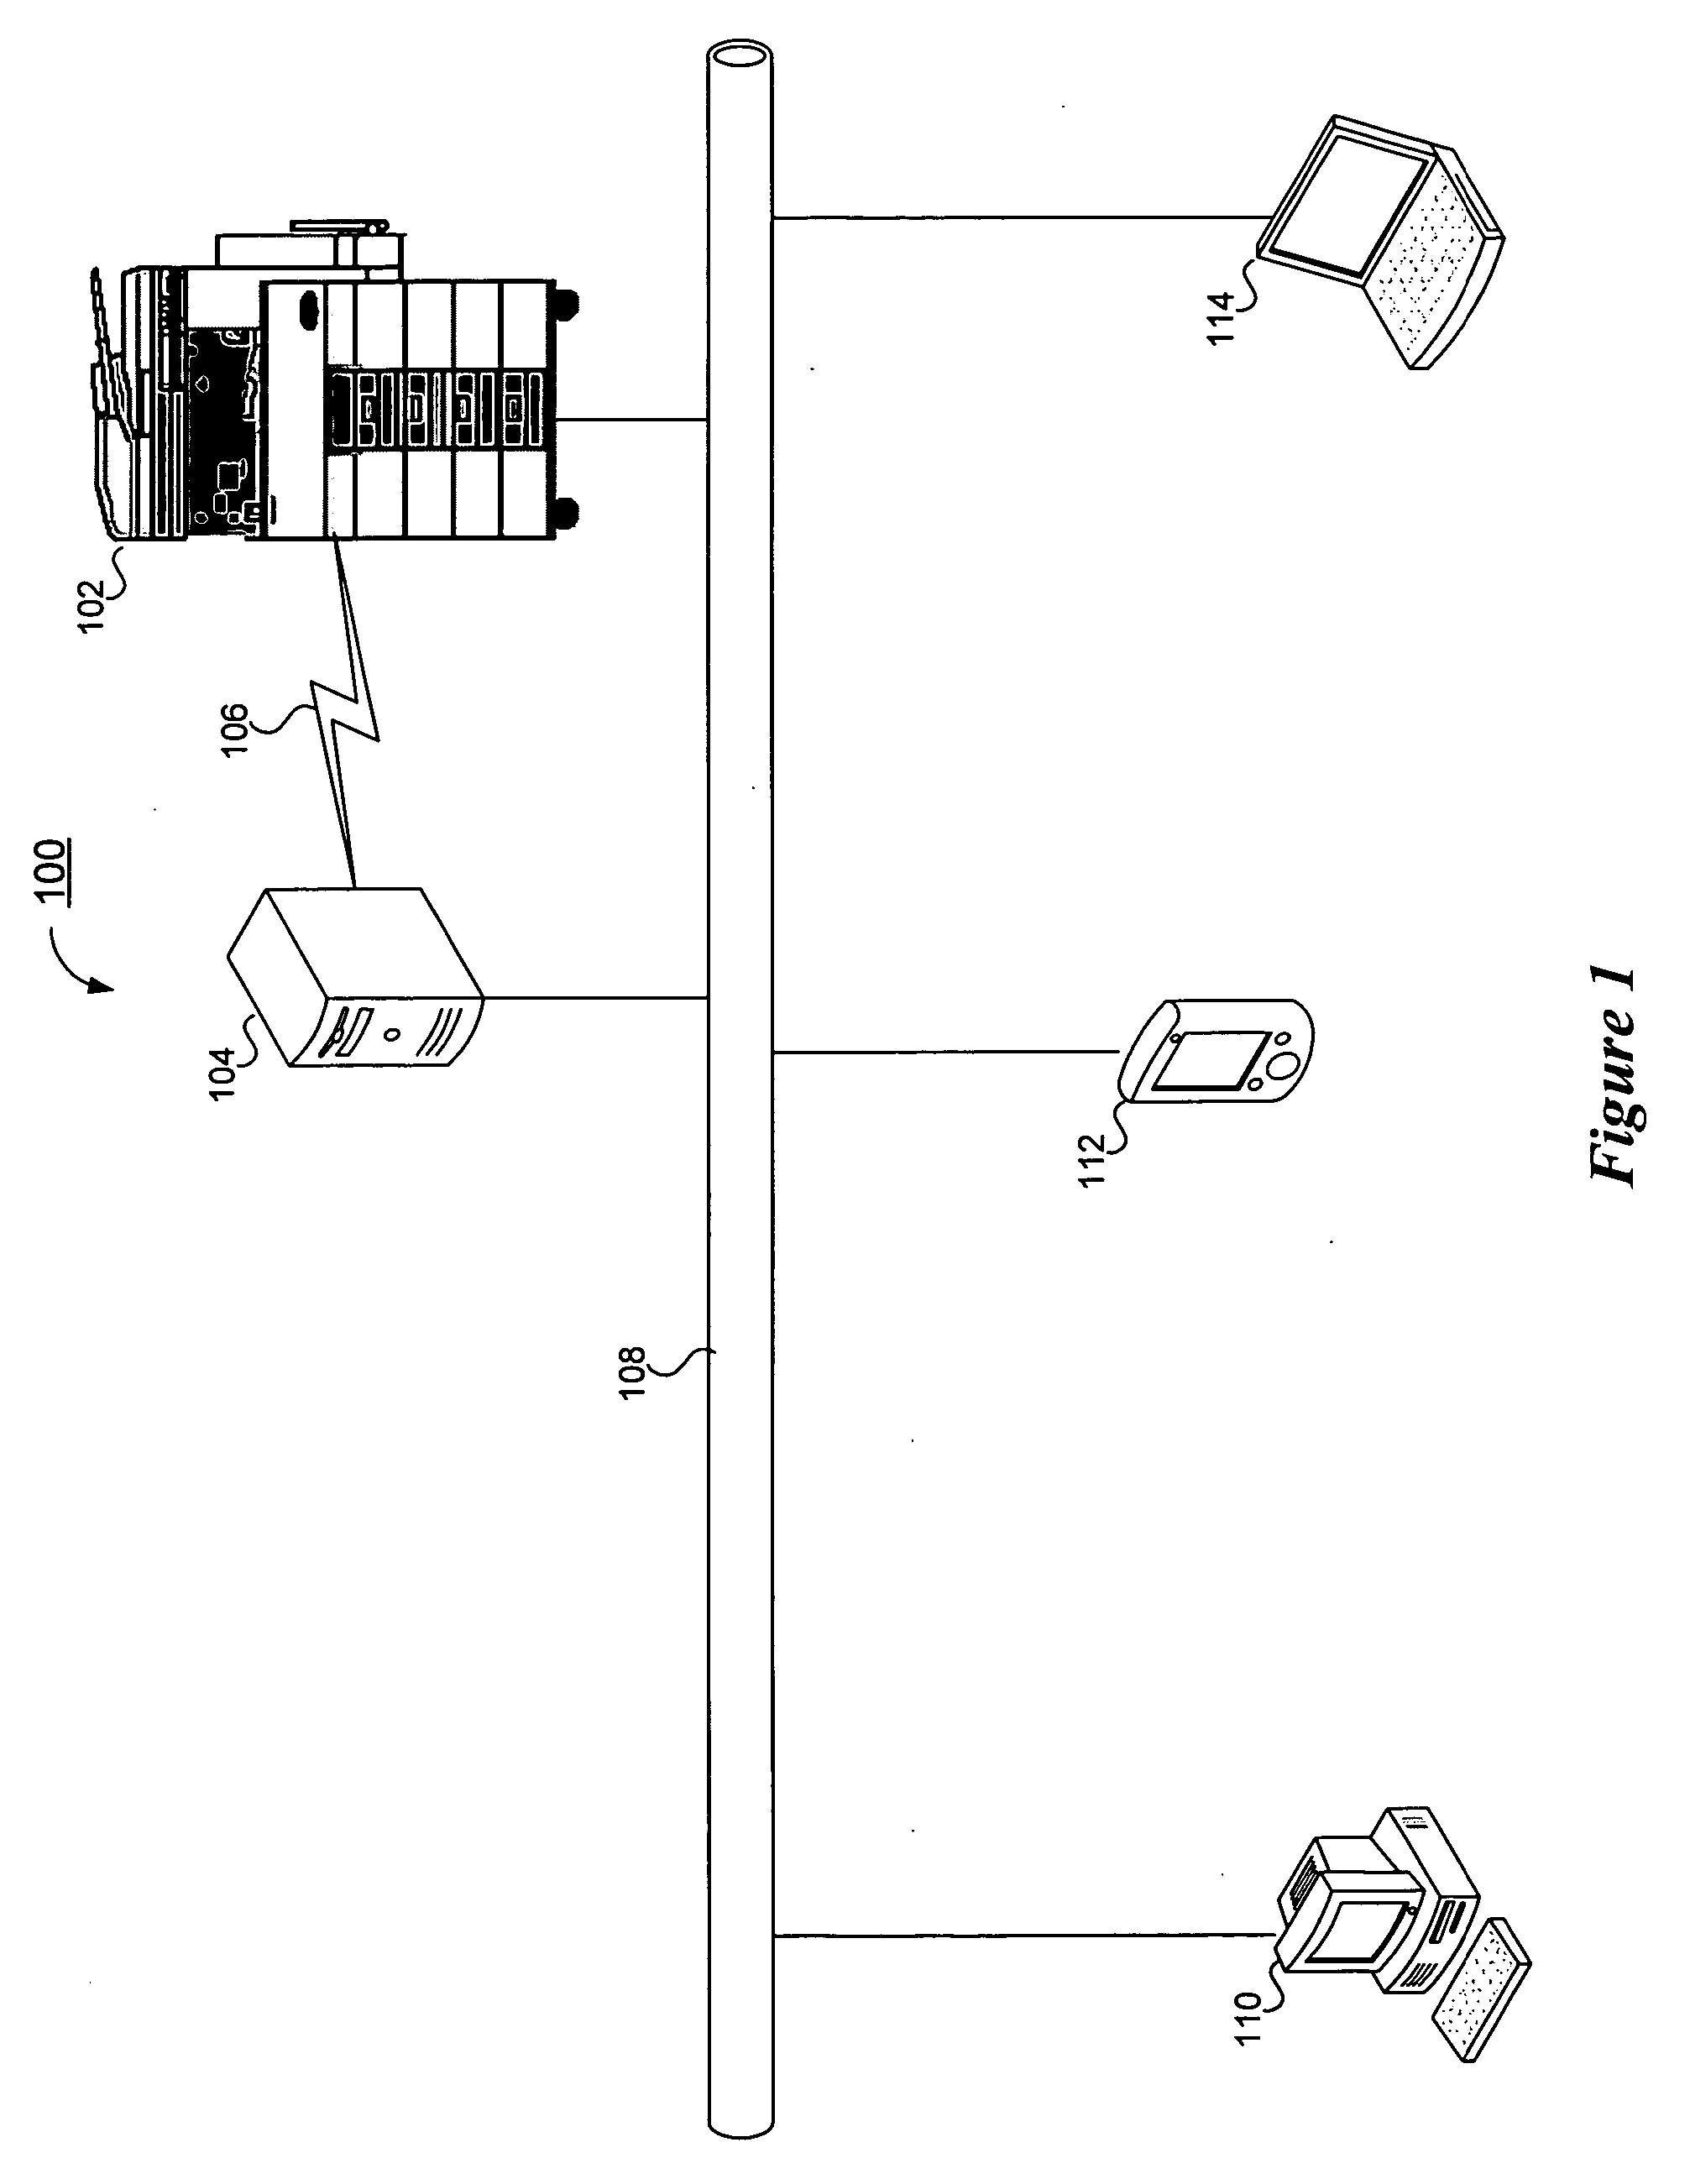 System and method for tracking conditions during document processing operations